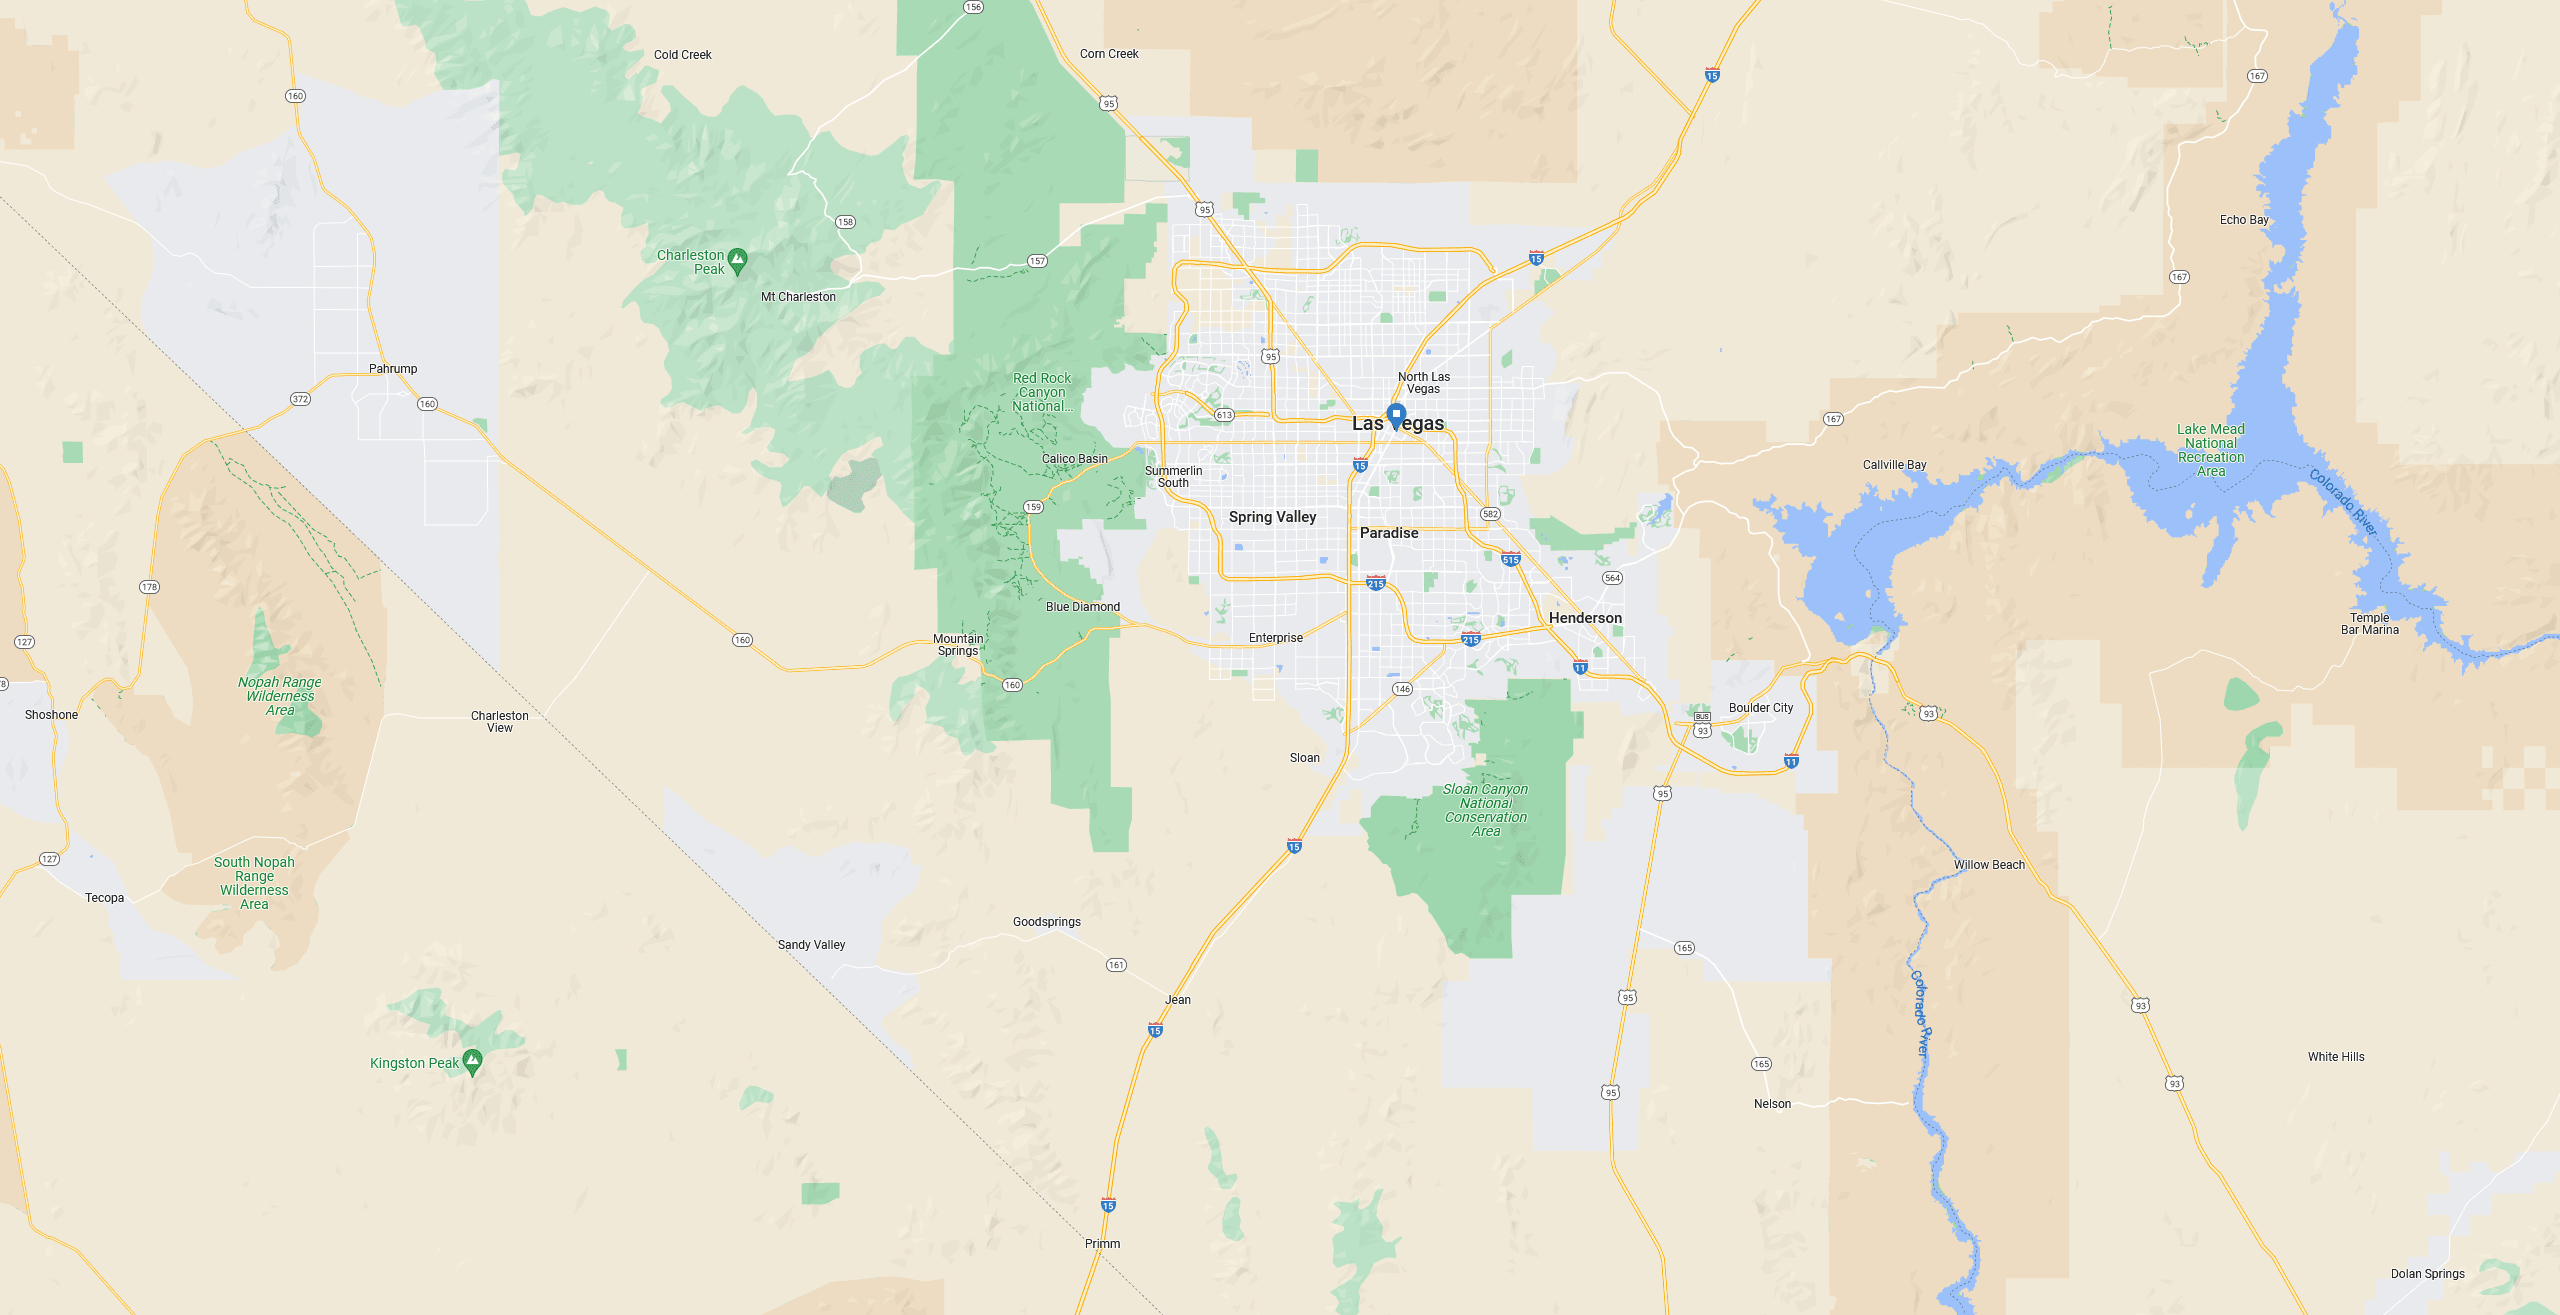 Prose Legal Office Locations Map Nevada | Prose Legal